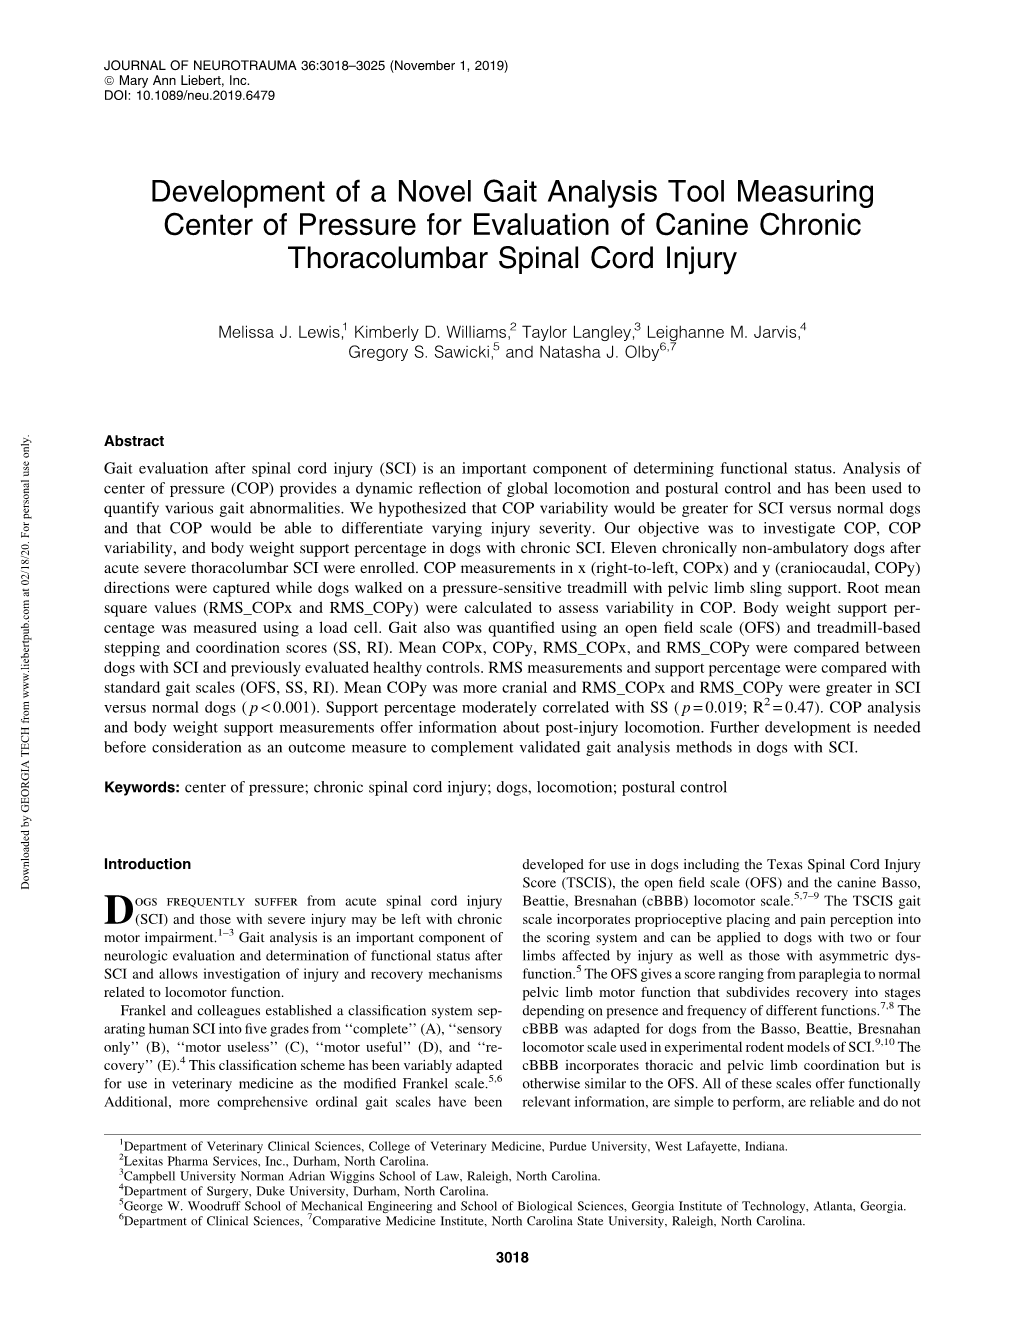 Development of a Novel Gait Analysis Tool Measuring Center of Pressure for Evaluation of Canine Chronic Thoracolumbar Spinal Cord Injury